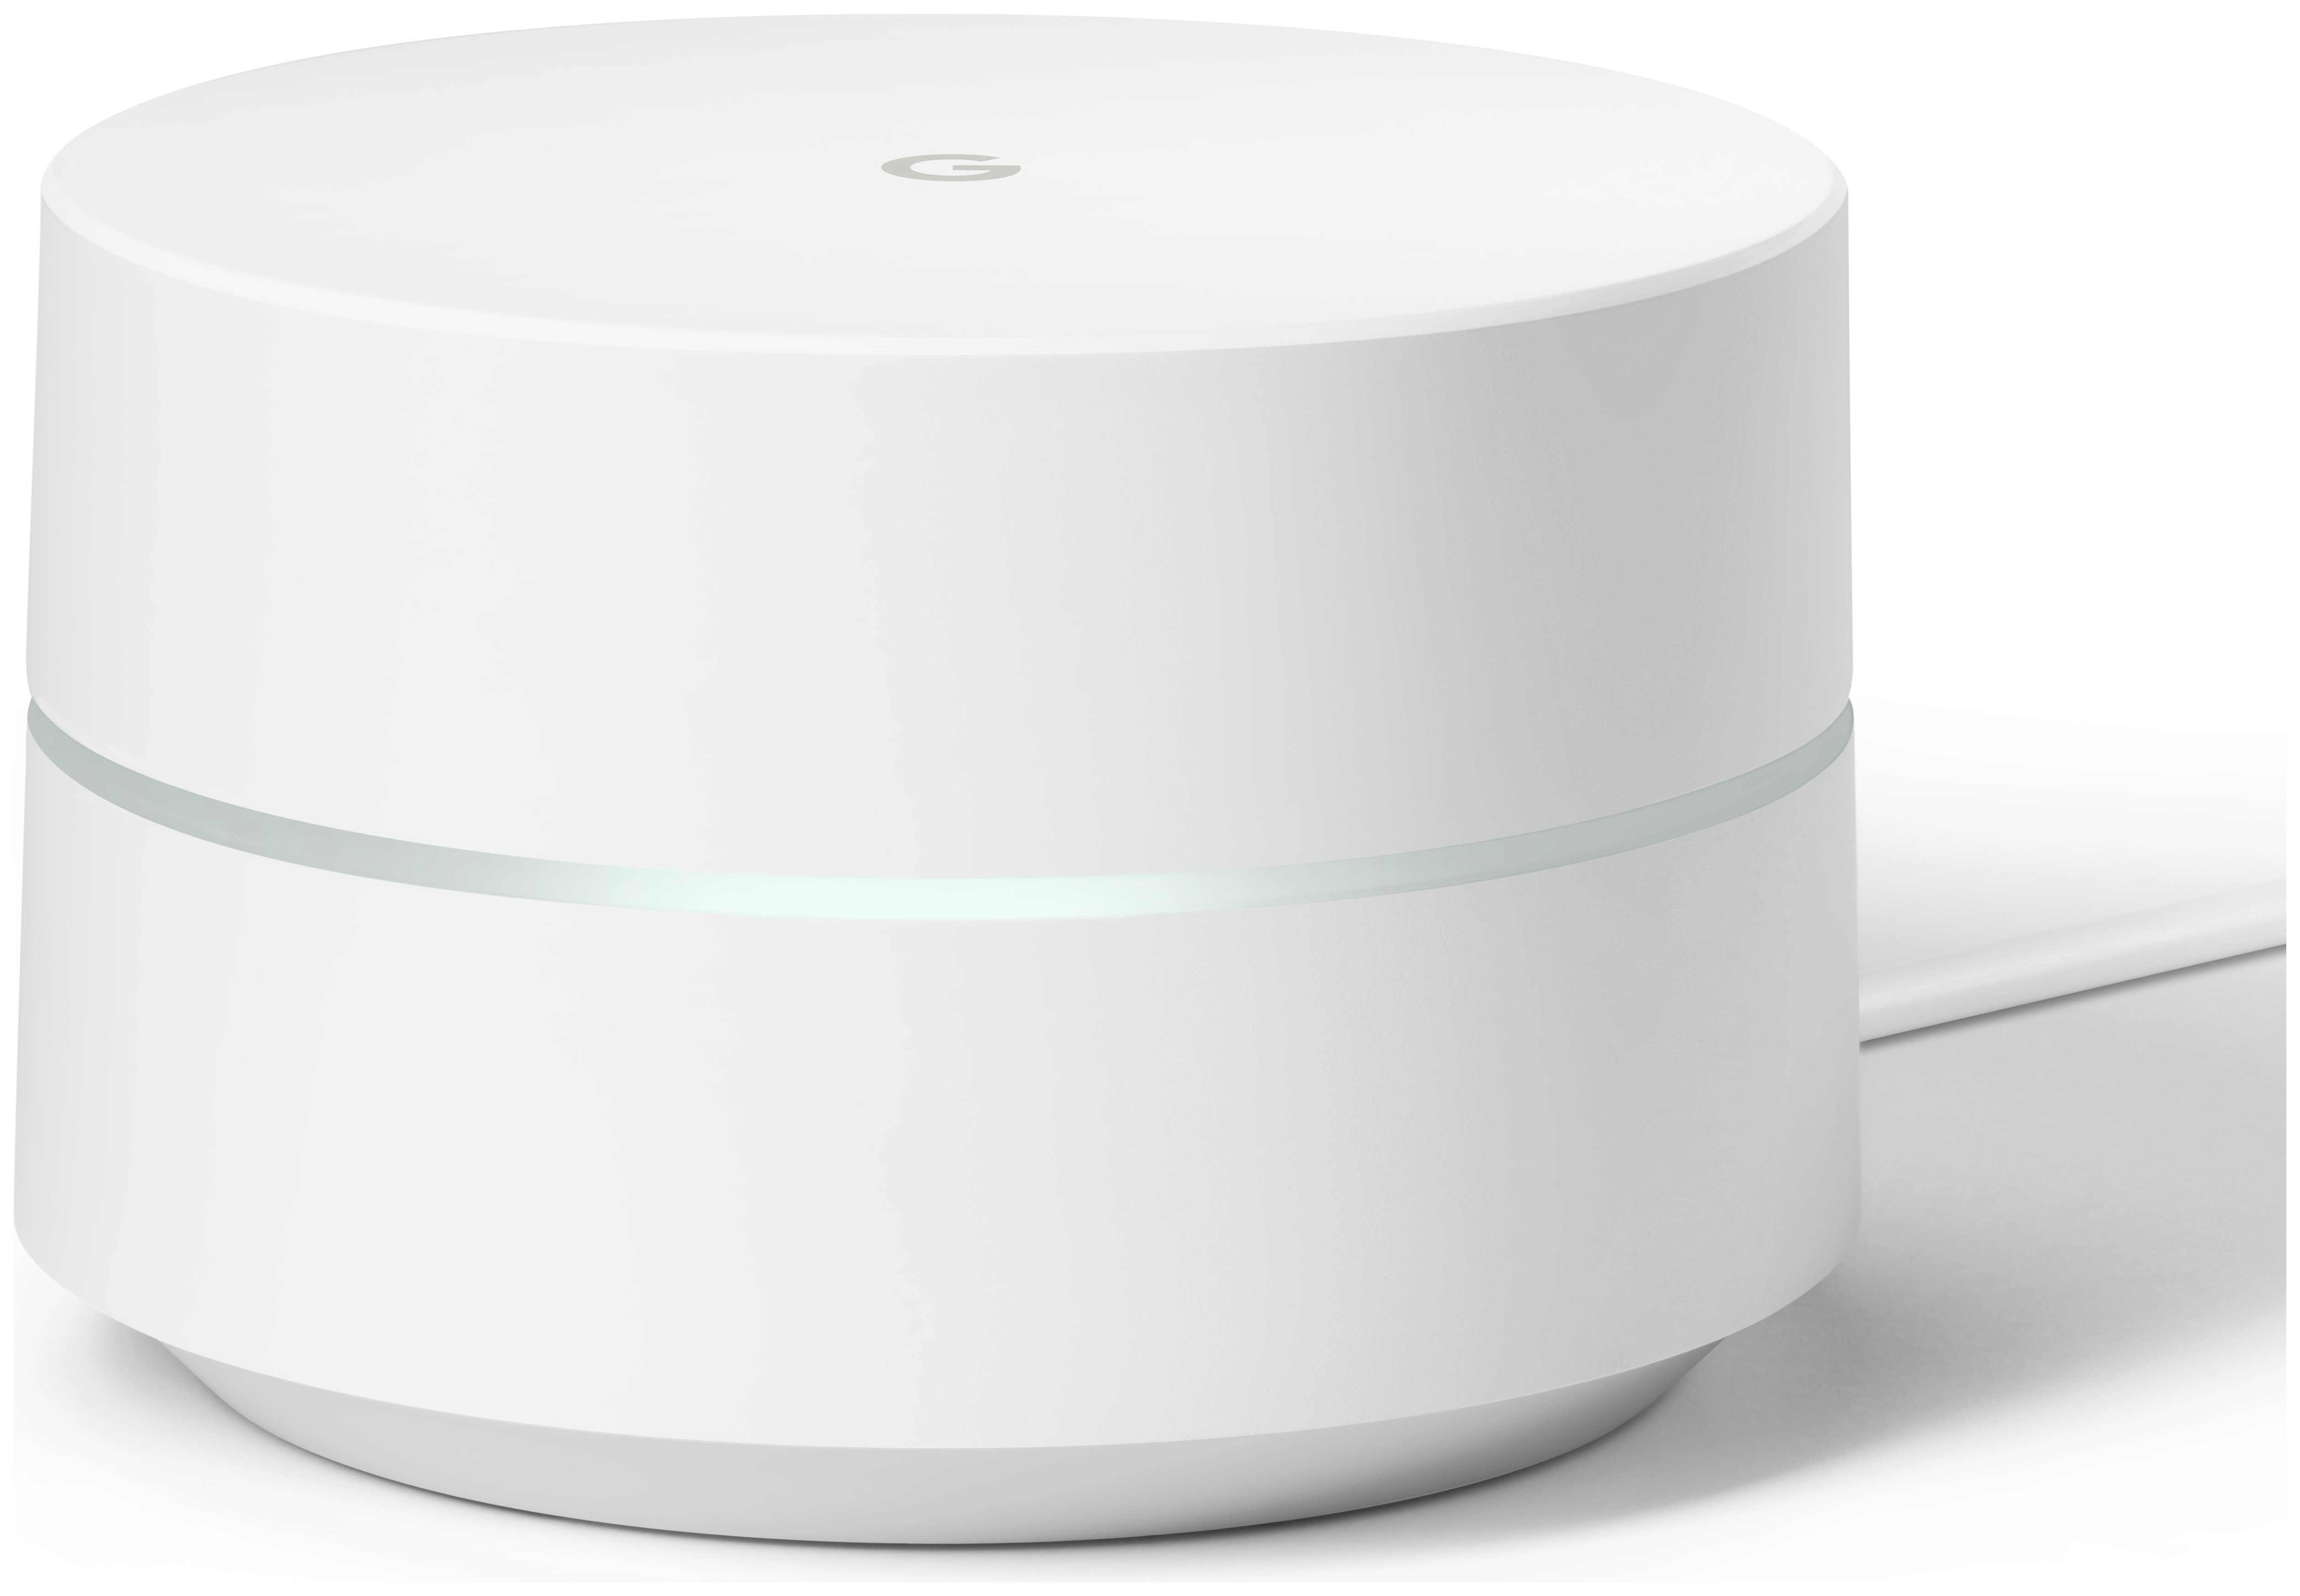 UPC 842776100467 product image for Google Wi-Fi Whole Home System - Single Pack | upcitemdb.com